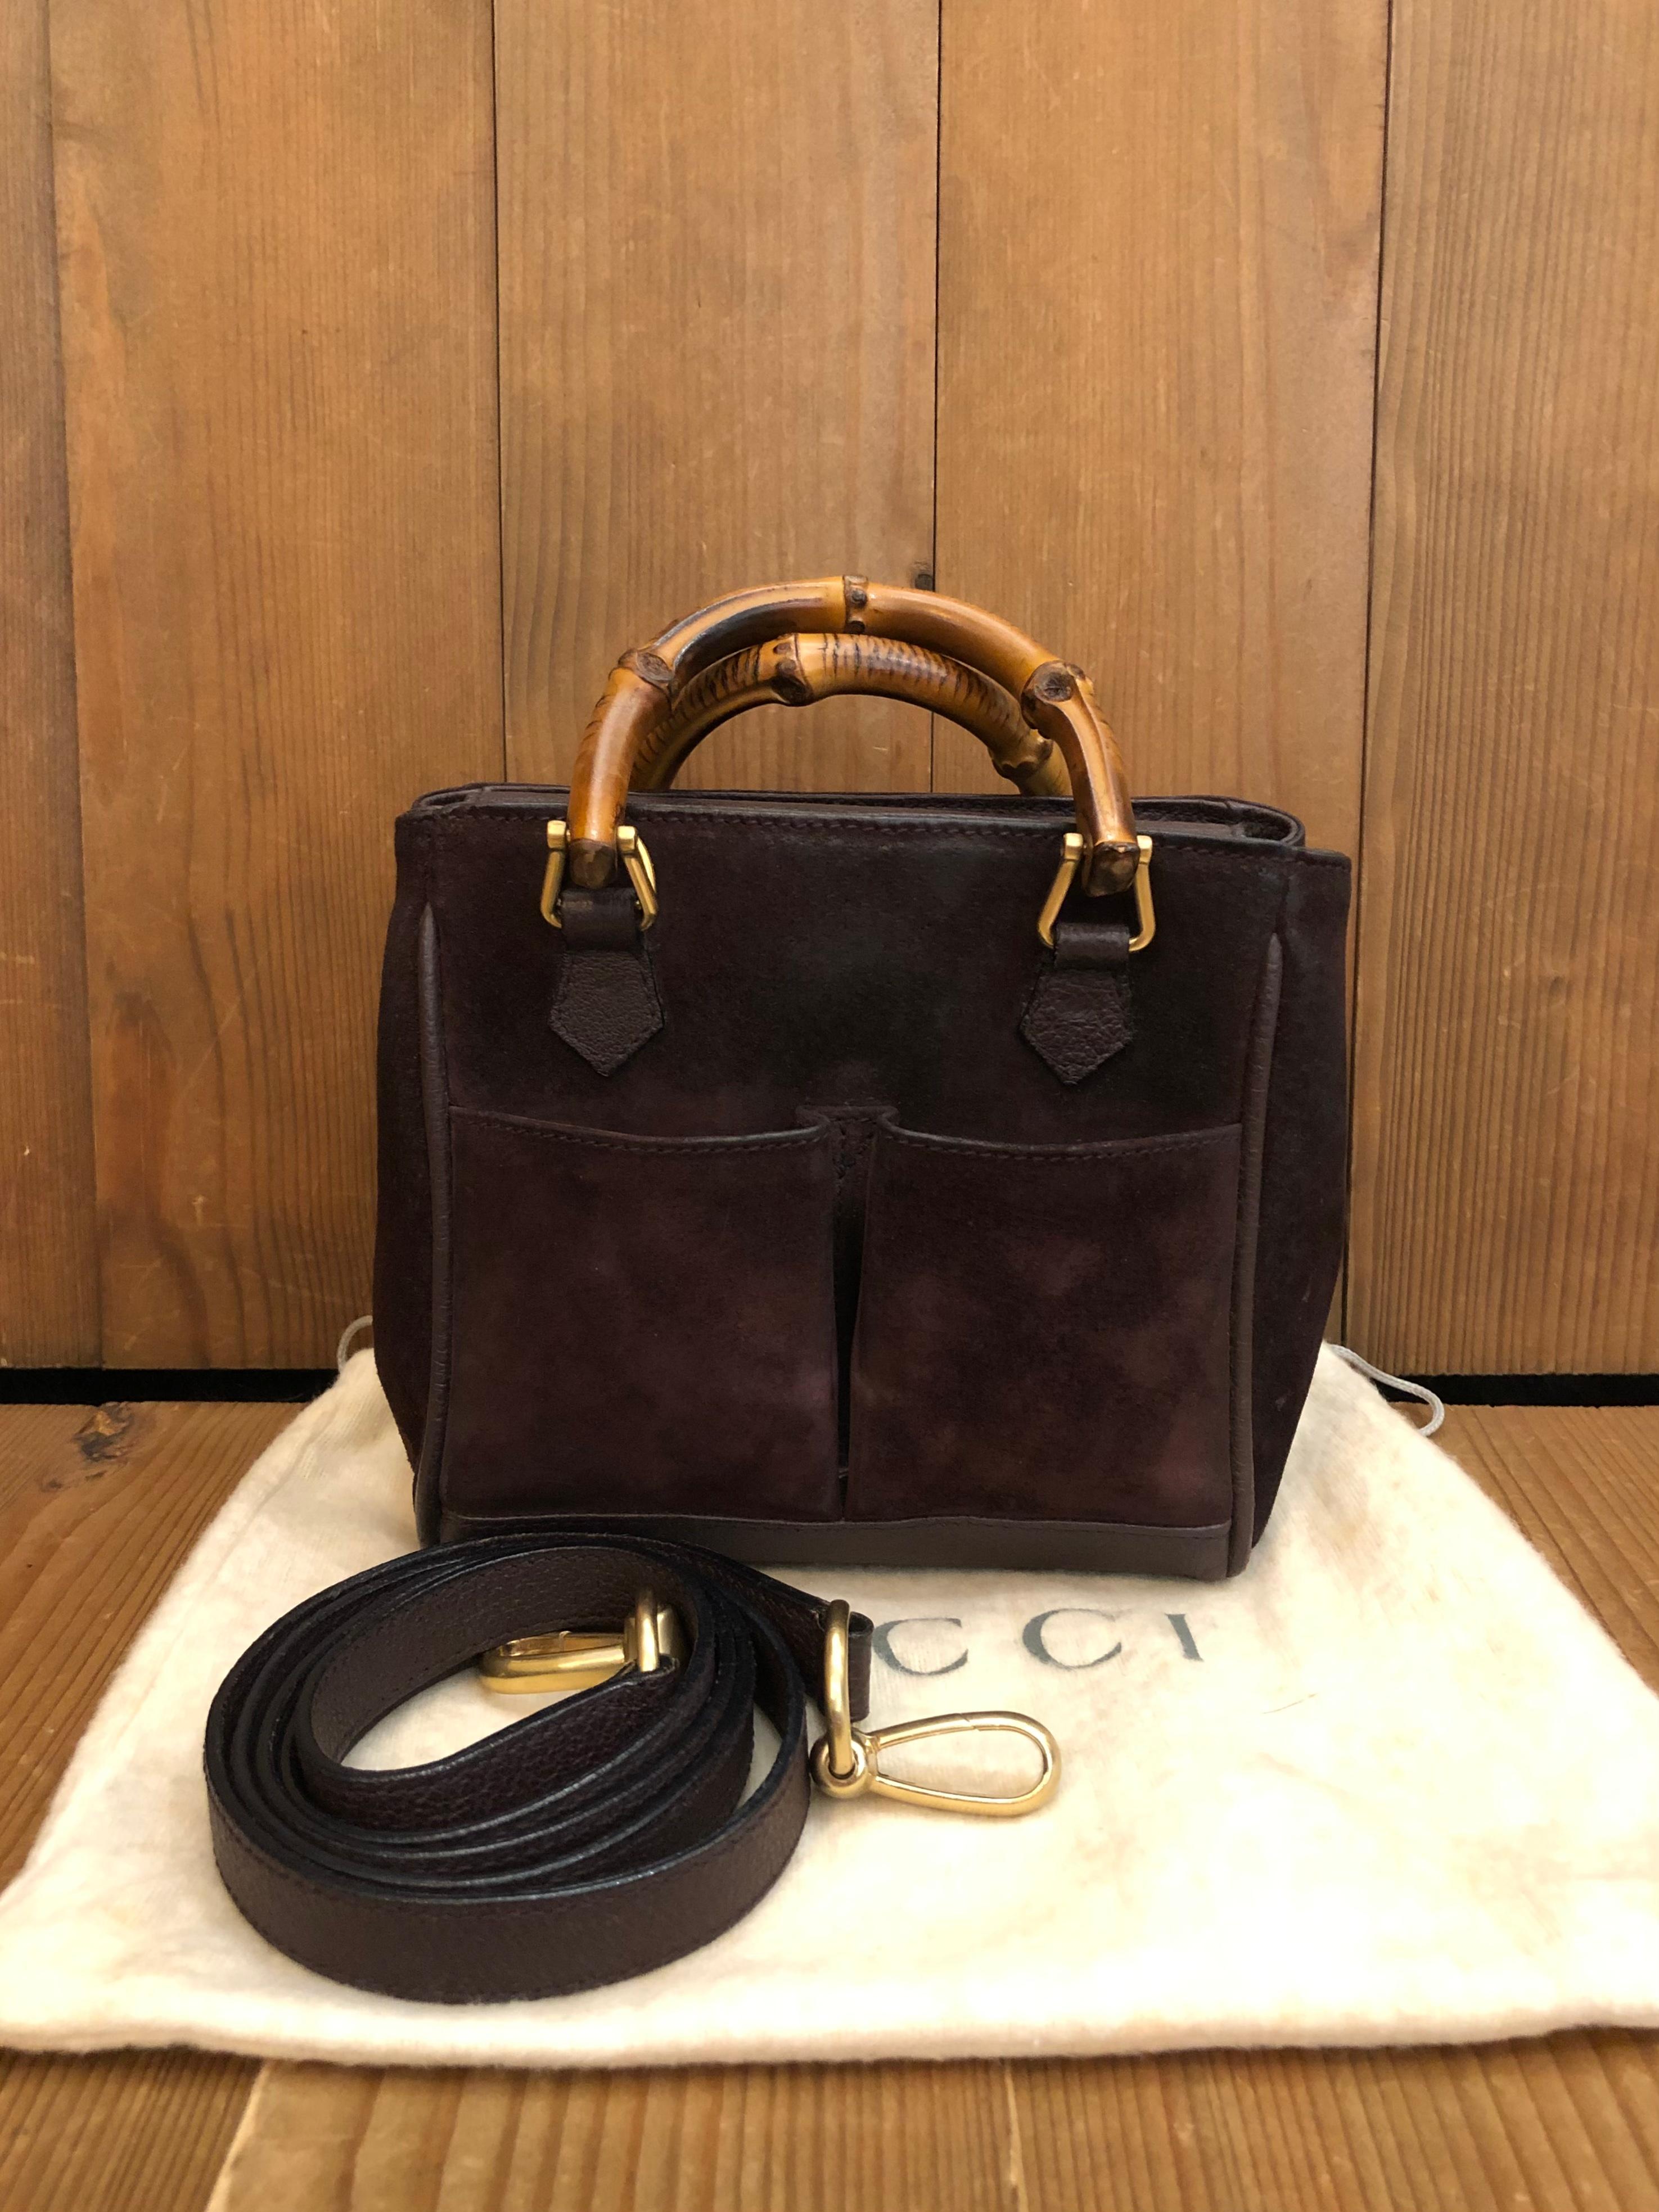 This 1990s vintage GUCCI mini 2-way crossbody bag is crafted of suede and pigskins leather in chocolate brown featuring matt gold toned hardware. The front of this bag features two open pockets. Top magnetic snap closure open to a dark brown